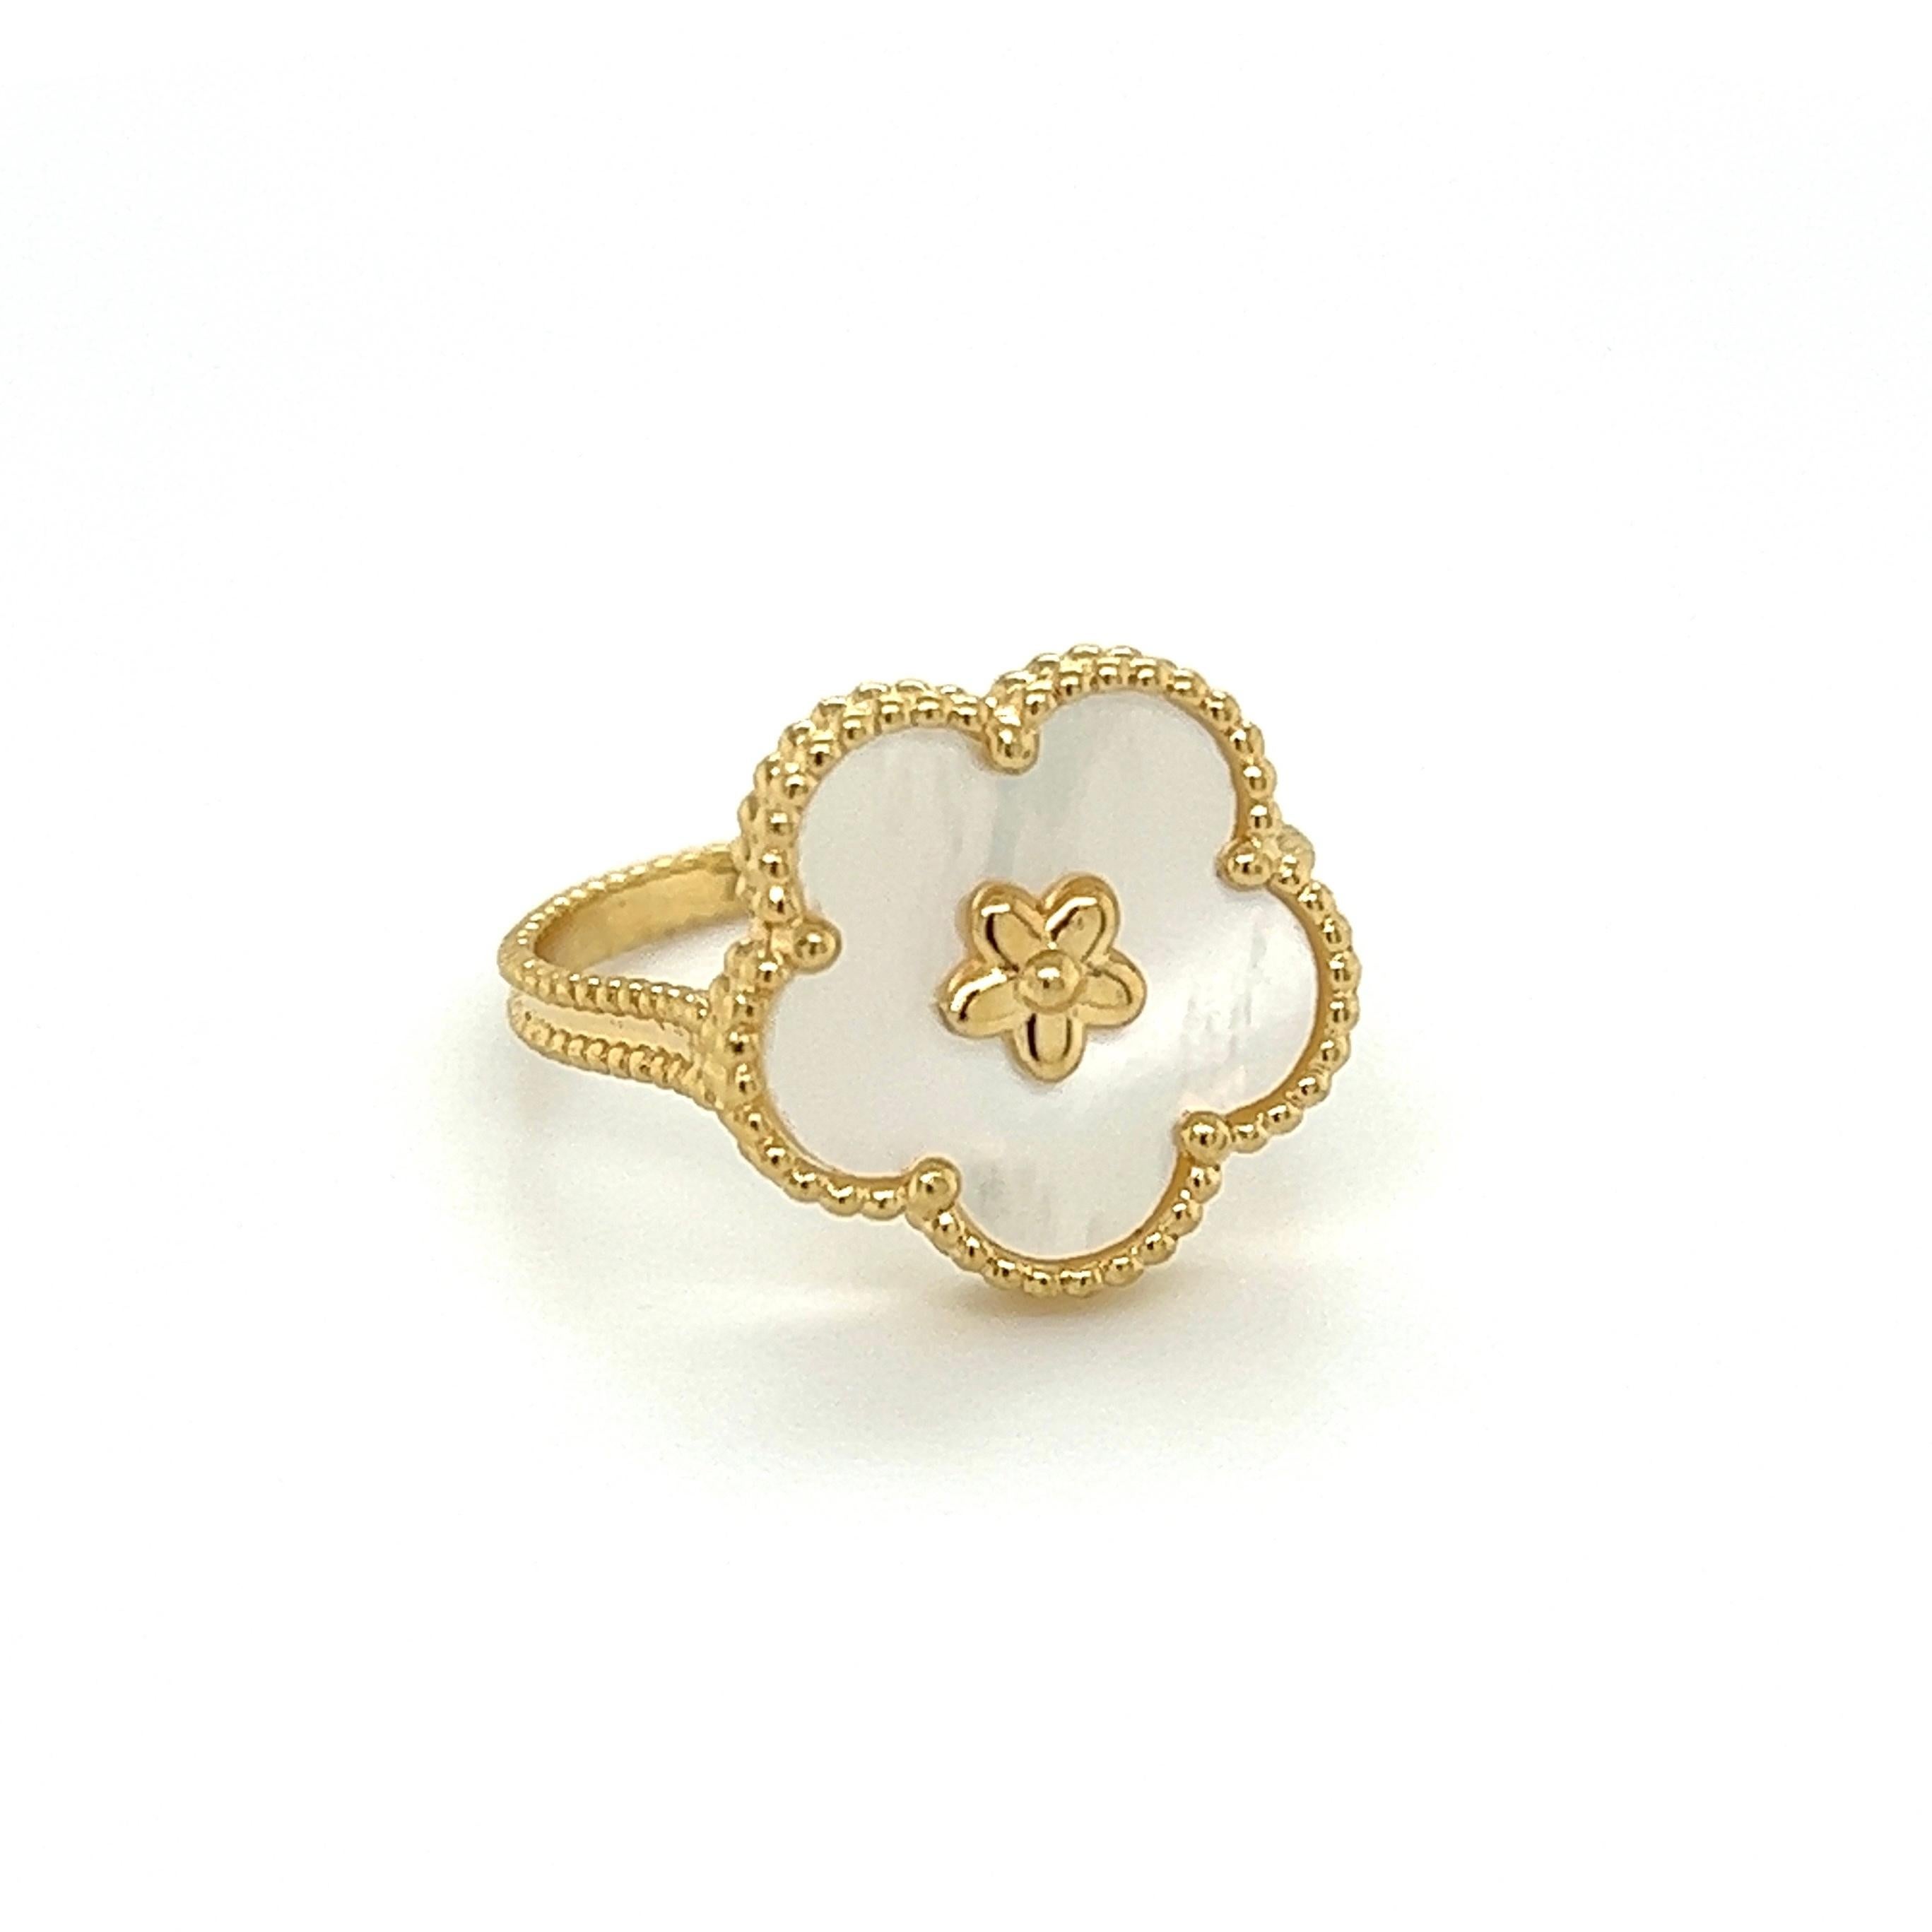 Simply Beautiful! Finely detailed Hand-Crafted Alhambra Clover Mother of Pearl MOP Gold Ring with Granulation. Hand crafted 18K Yellow Gold mounting. Ring size: 5.75, we offer ring resizing. In excellent condition, recently professionally cleaned